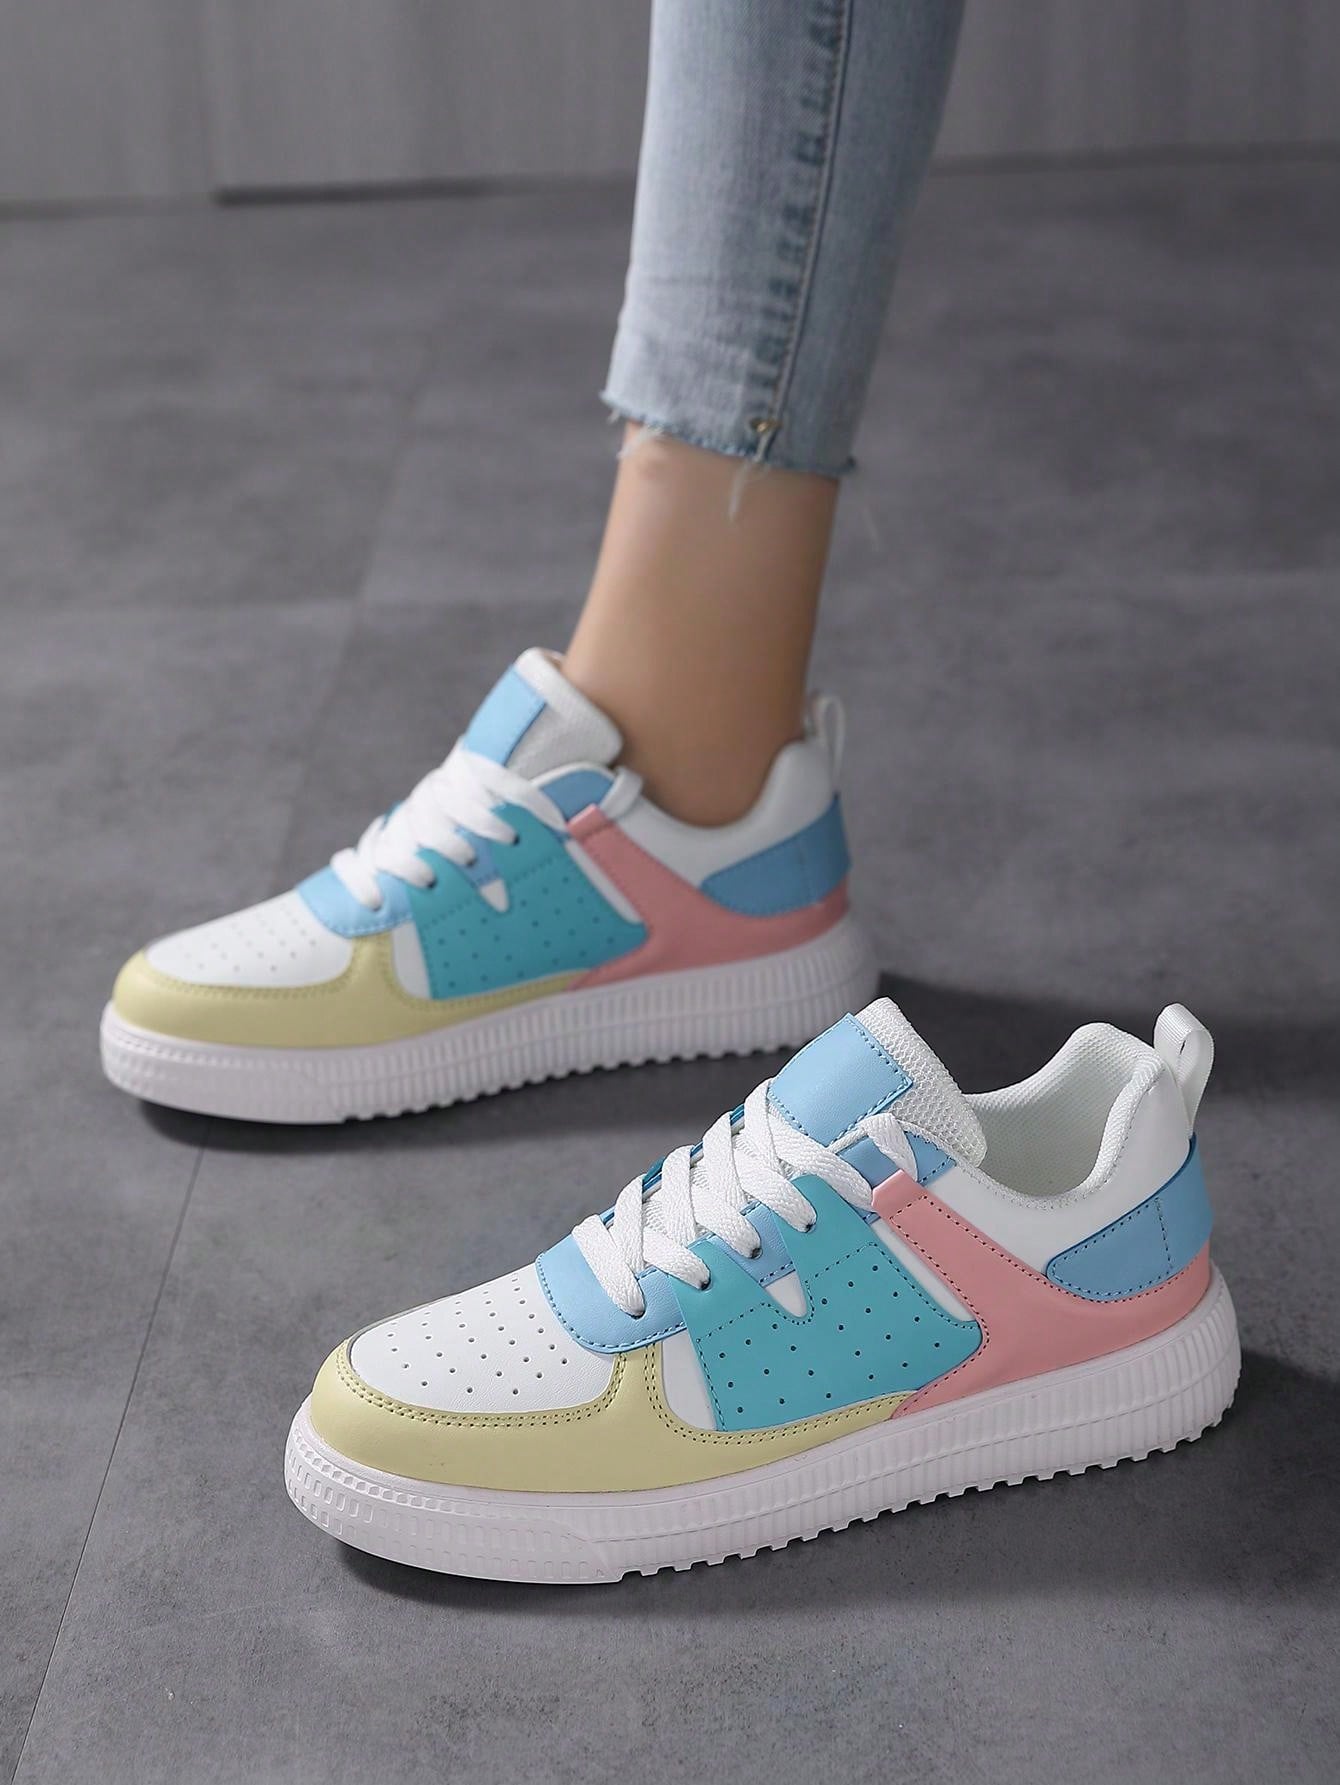 Fashionable Women Sports Shoes, Minimalist Style Classic White Casual Skate Shoes, Solid Color Daily All-Matching Round Toe Thick-Soled Height Increasing Outdoor Hiking Sneakers-Blue and White-10